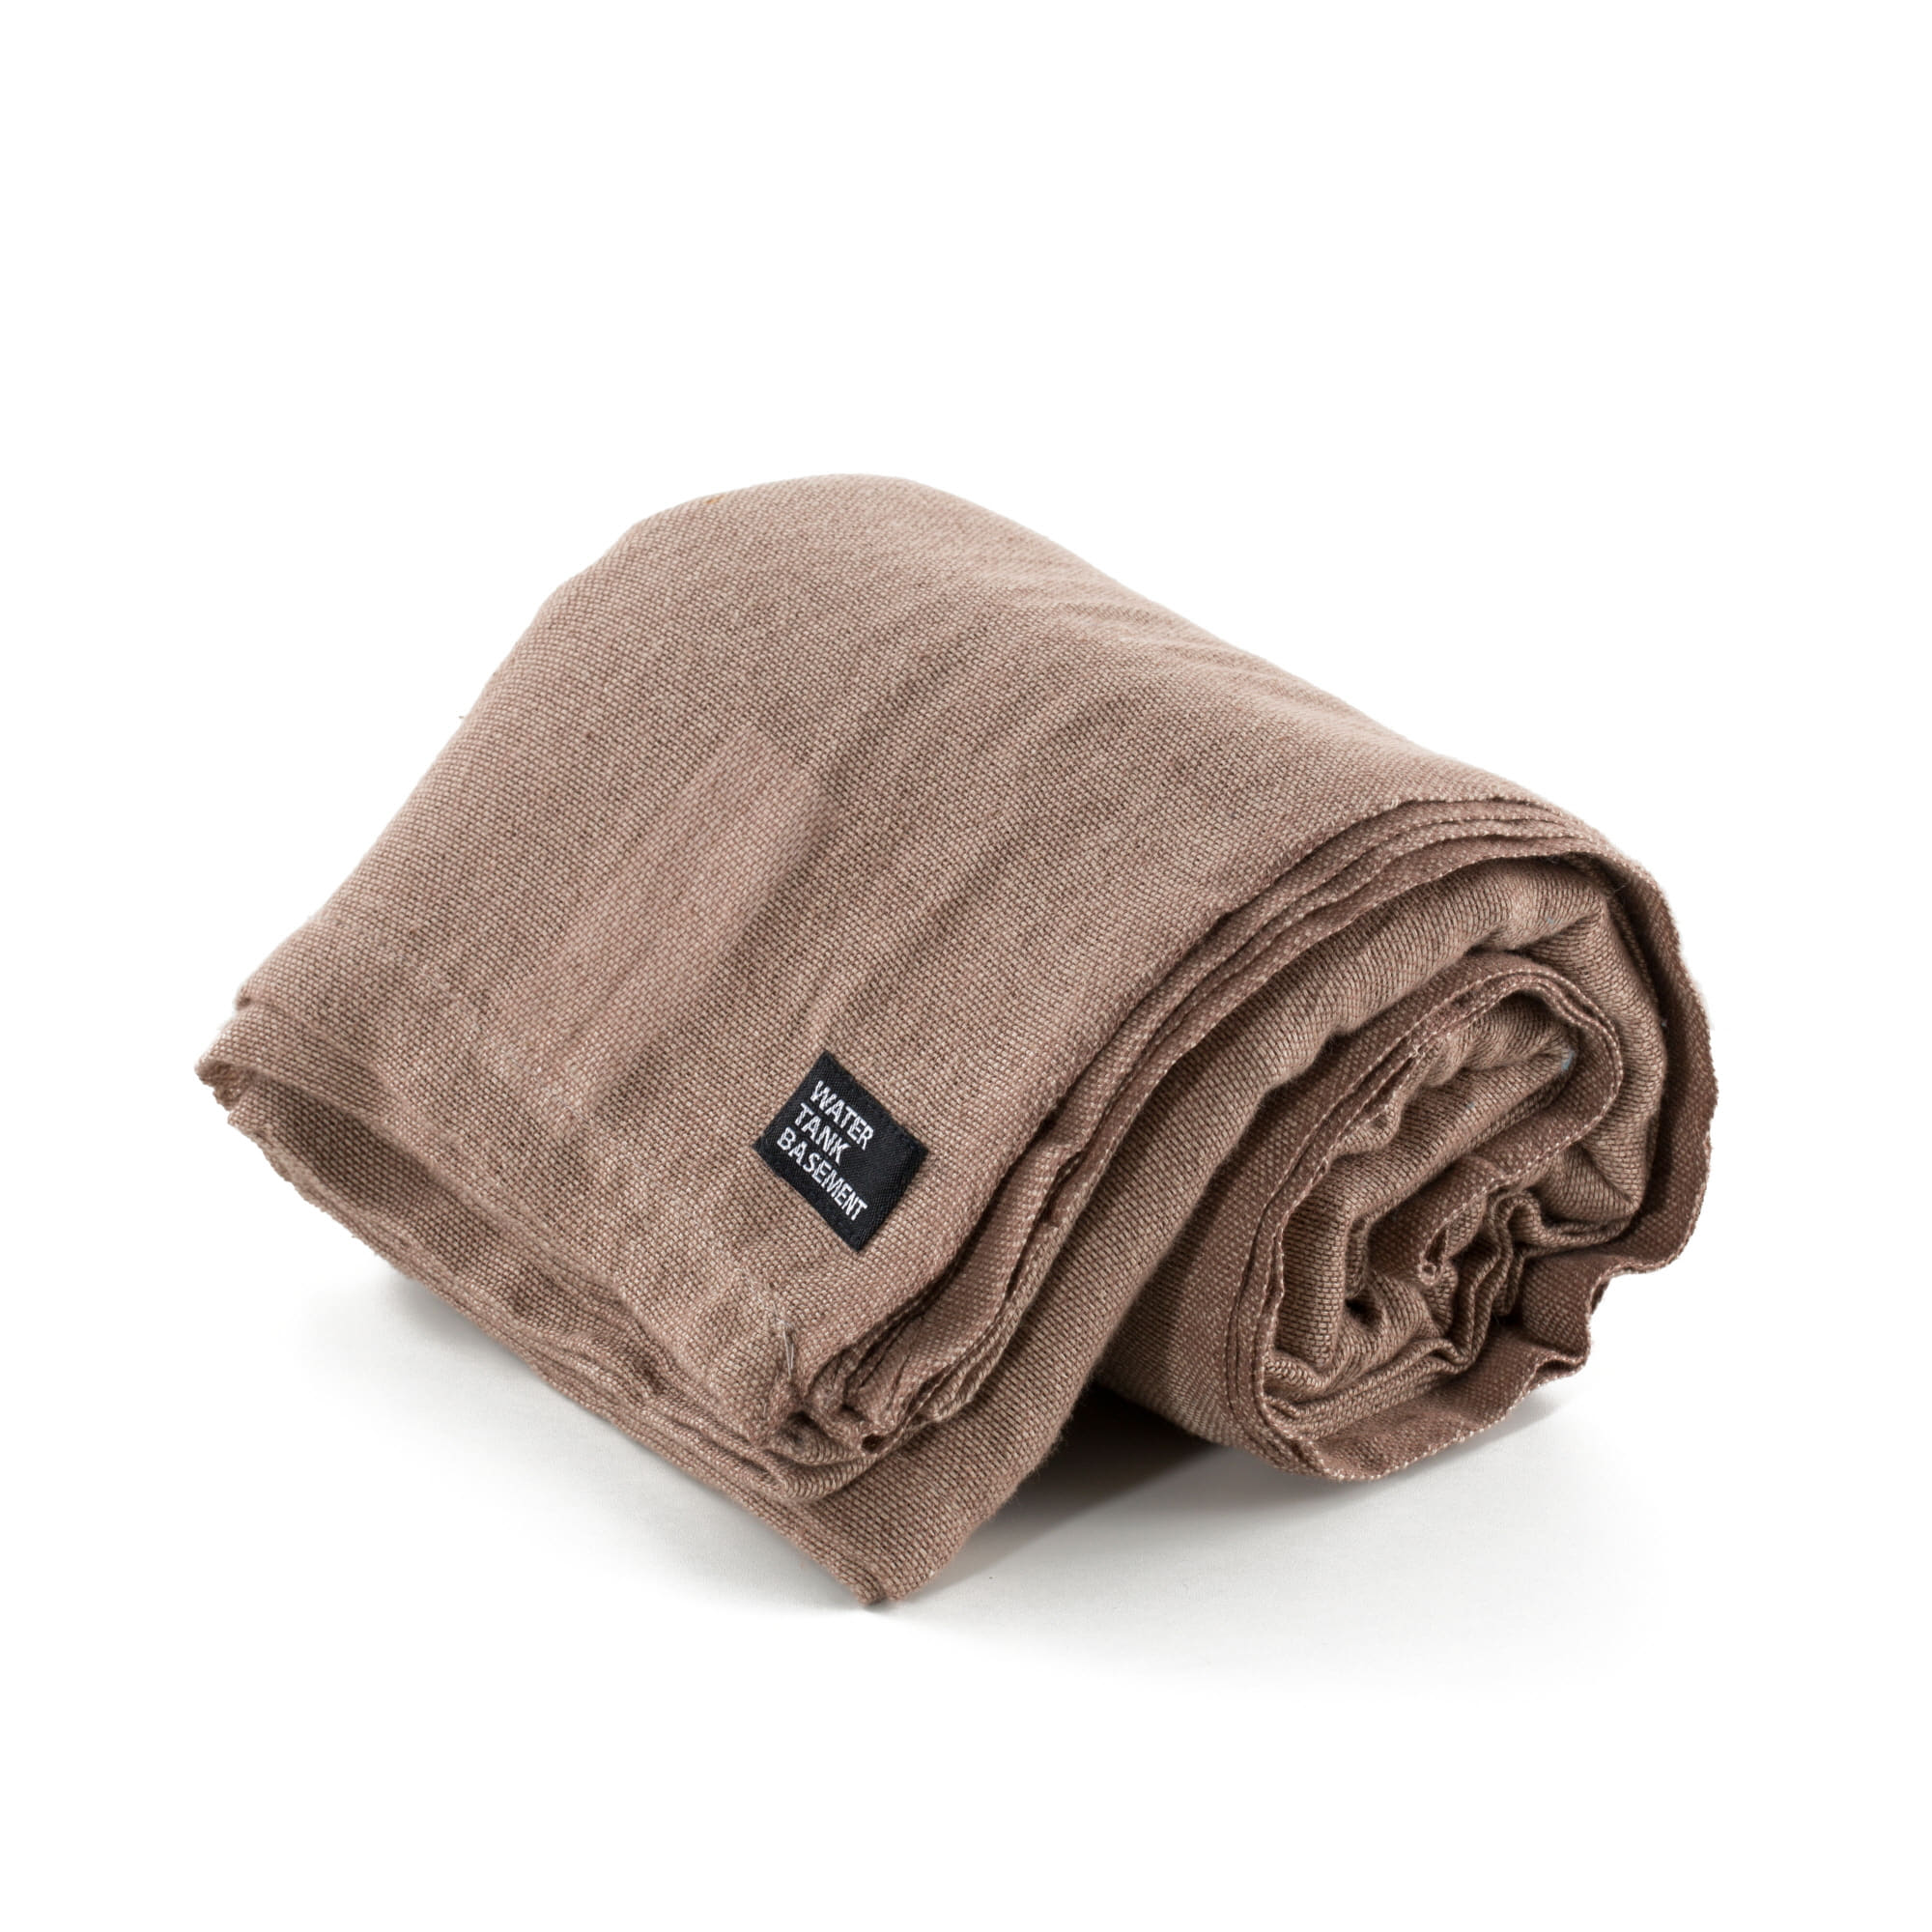 COTTON COVER - light brown